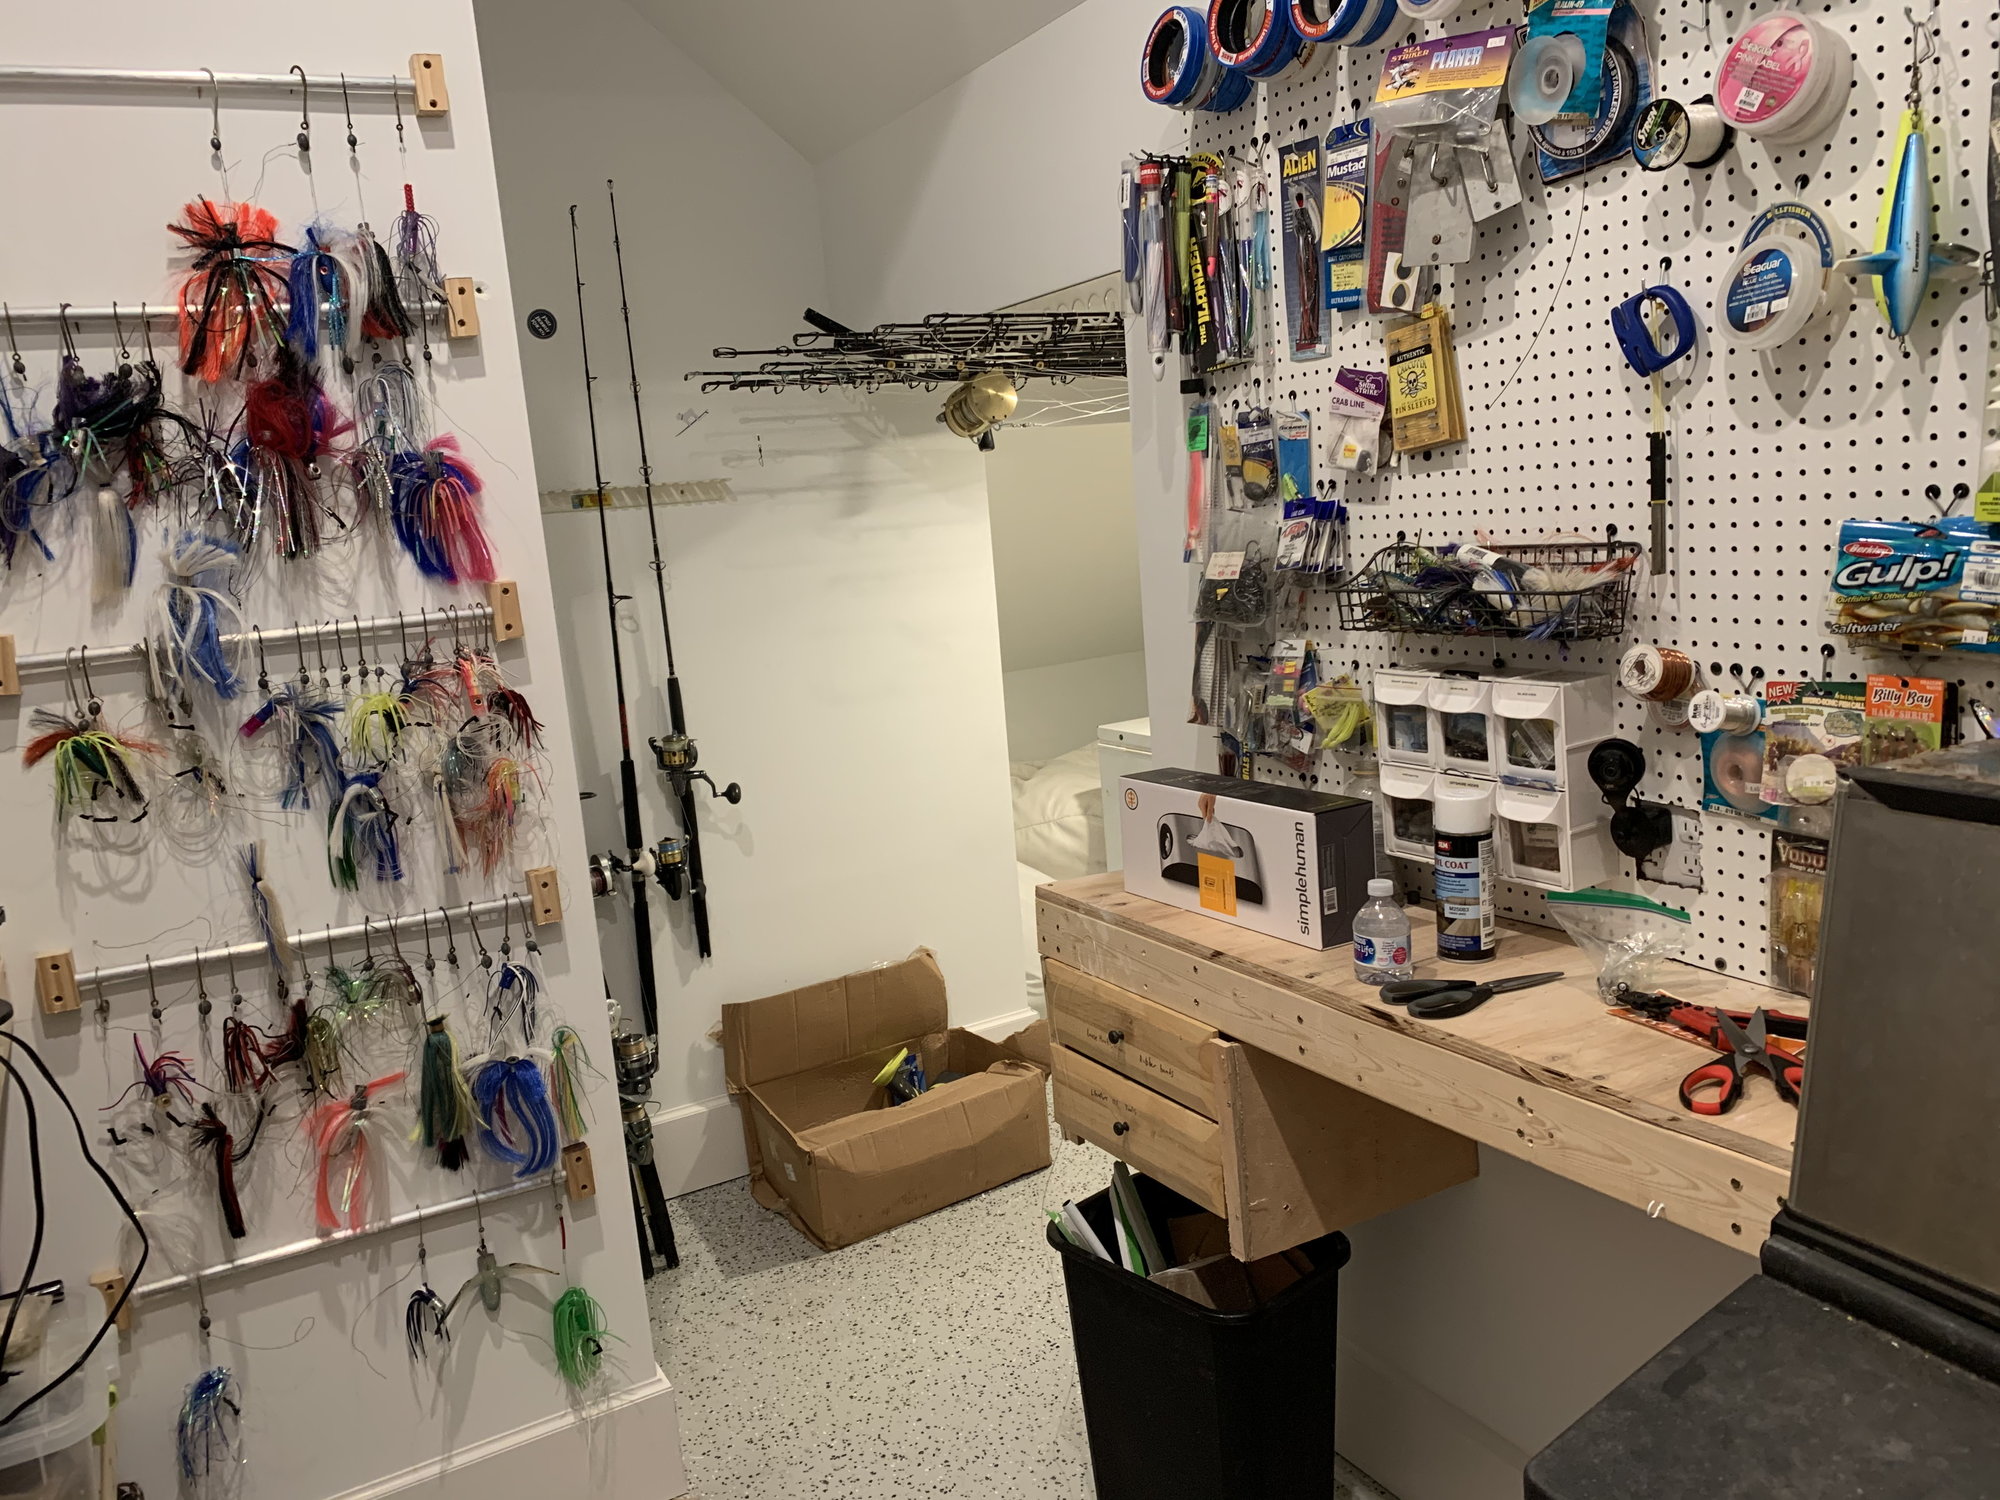 Tackle room/storage photos and ideas - The Hull Truth - Boating